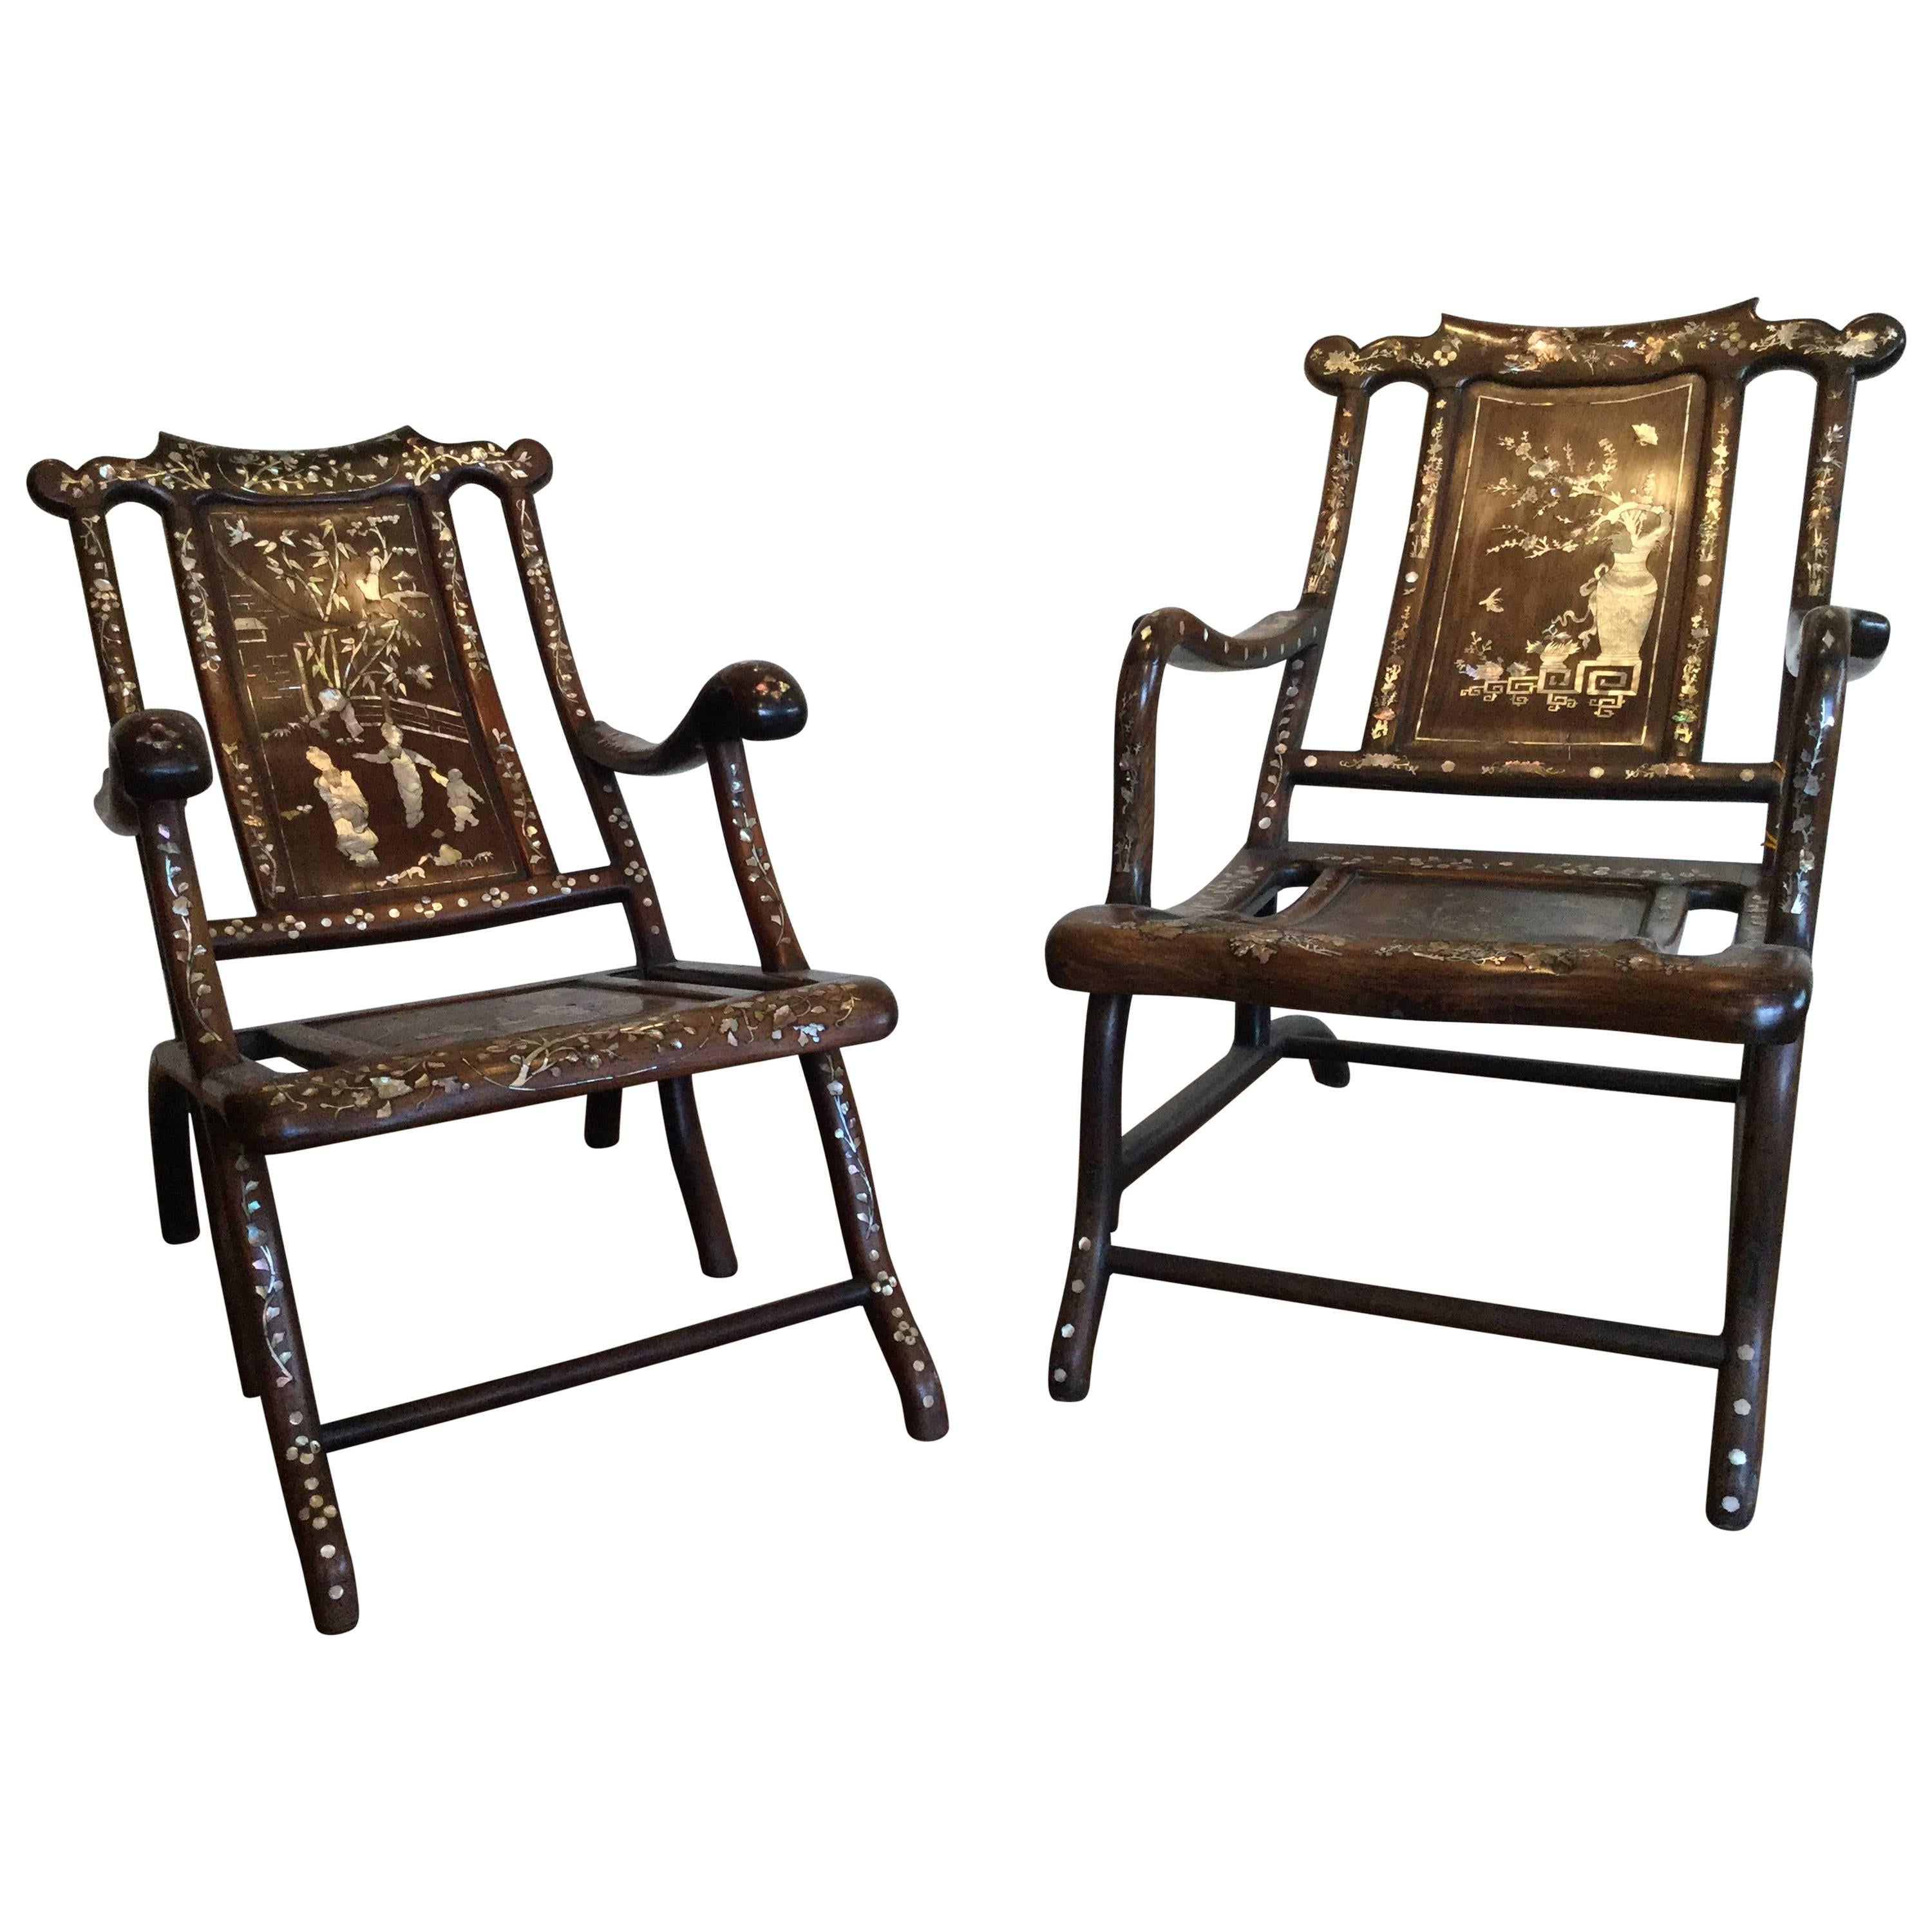 Pair of Inlaid Chinese Moon-Gazing Chairs For Sale